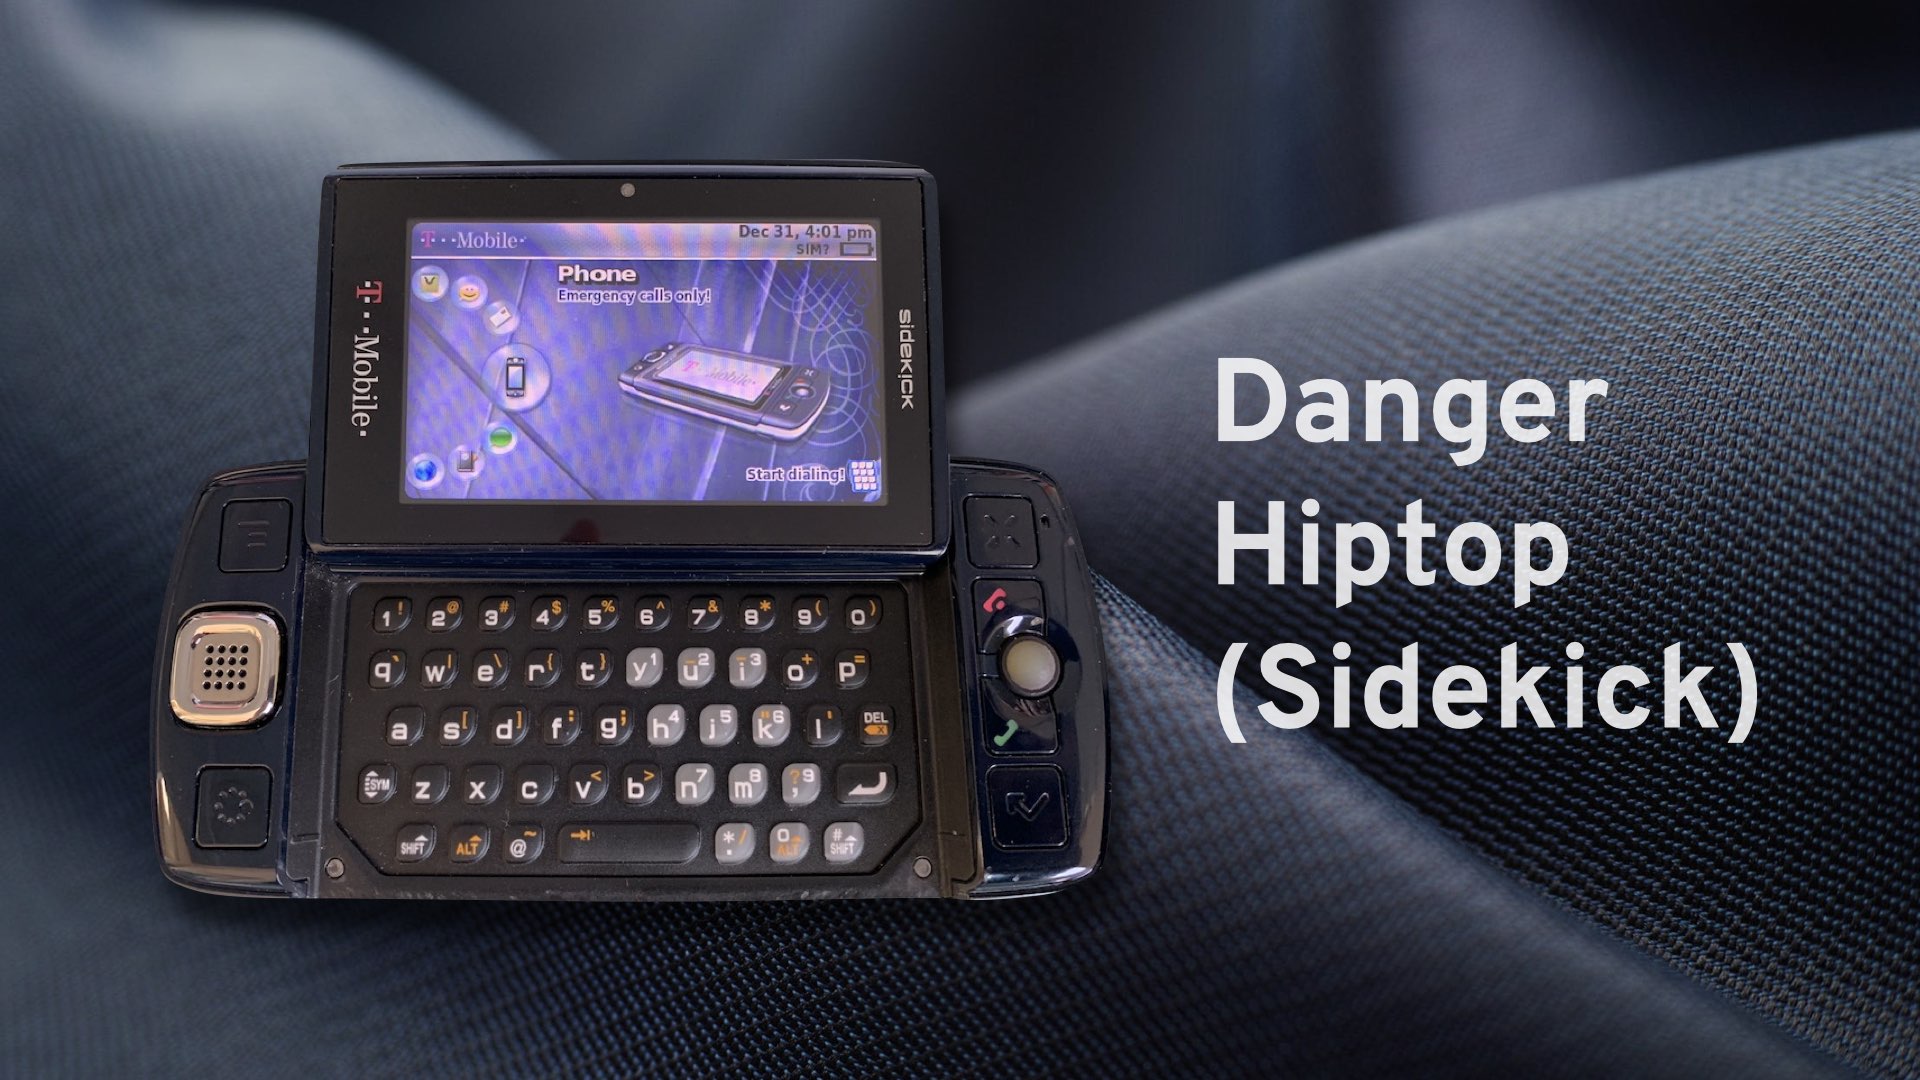 A Danger Hiptop device sitting on a table